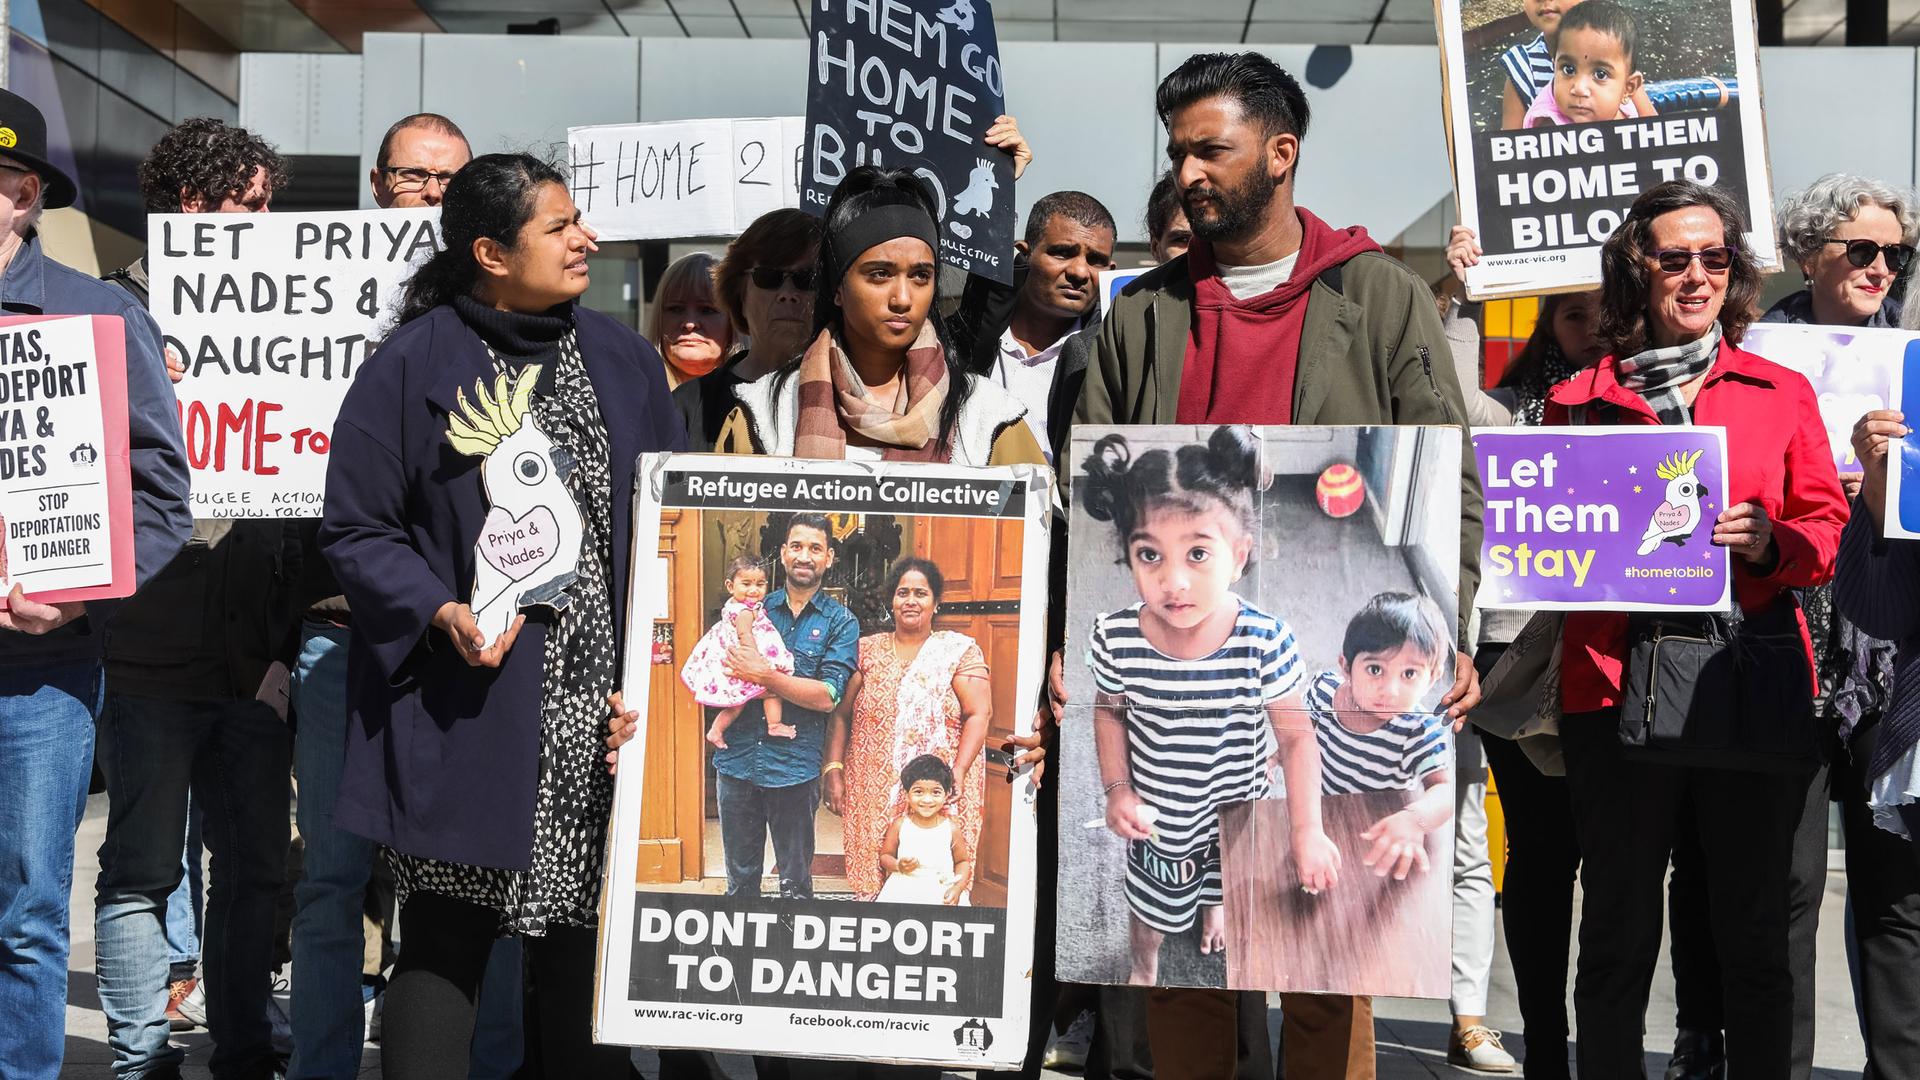 A group of protesters are shown holding placards with pictures of a Tamil family that includes the father, mother and their two small children.